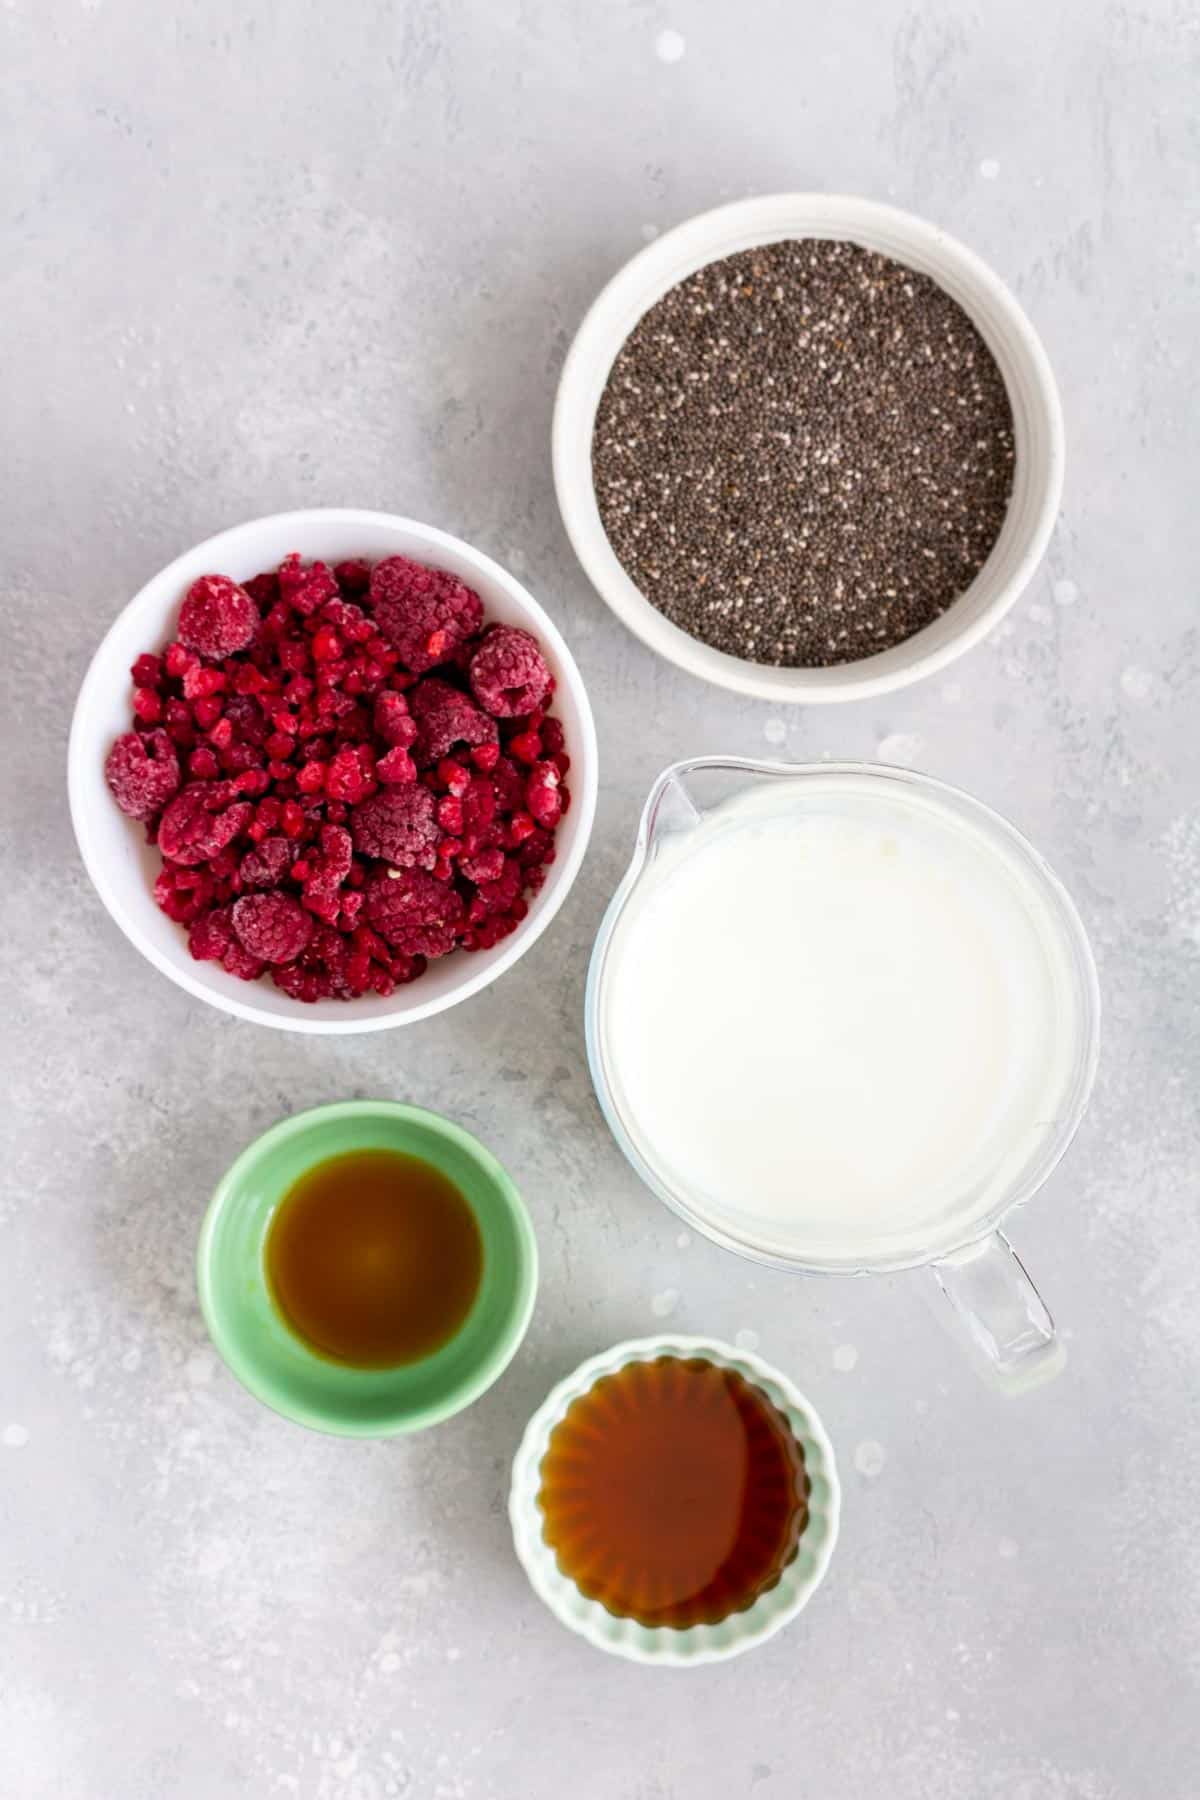 Ingredients needed to make raspberry chia pudding.